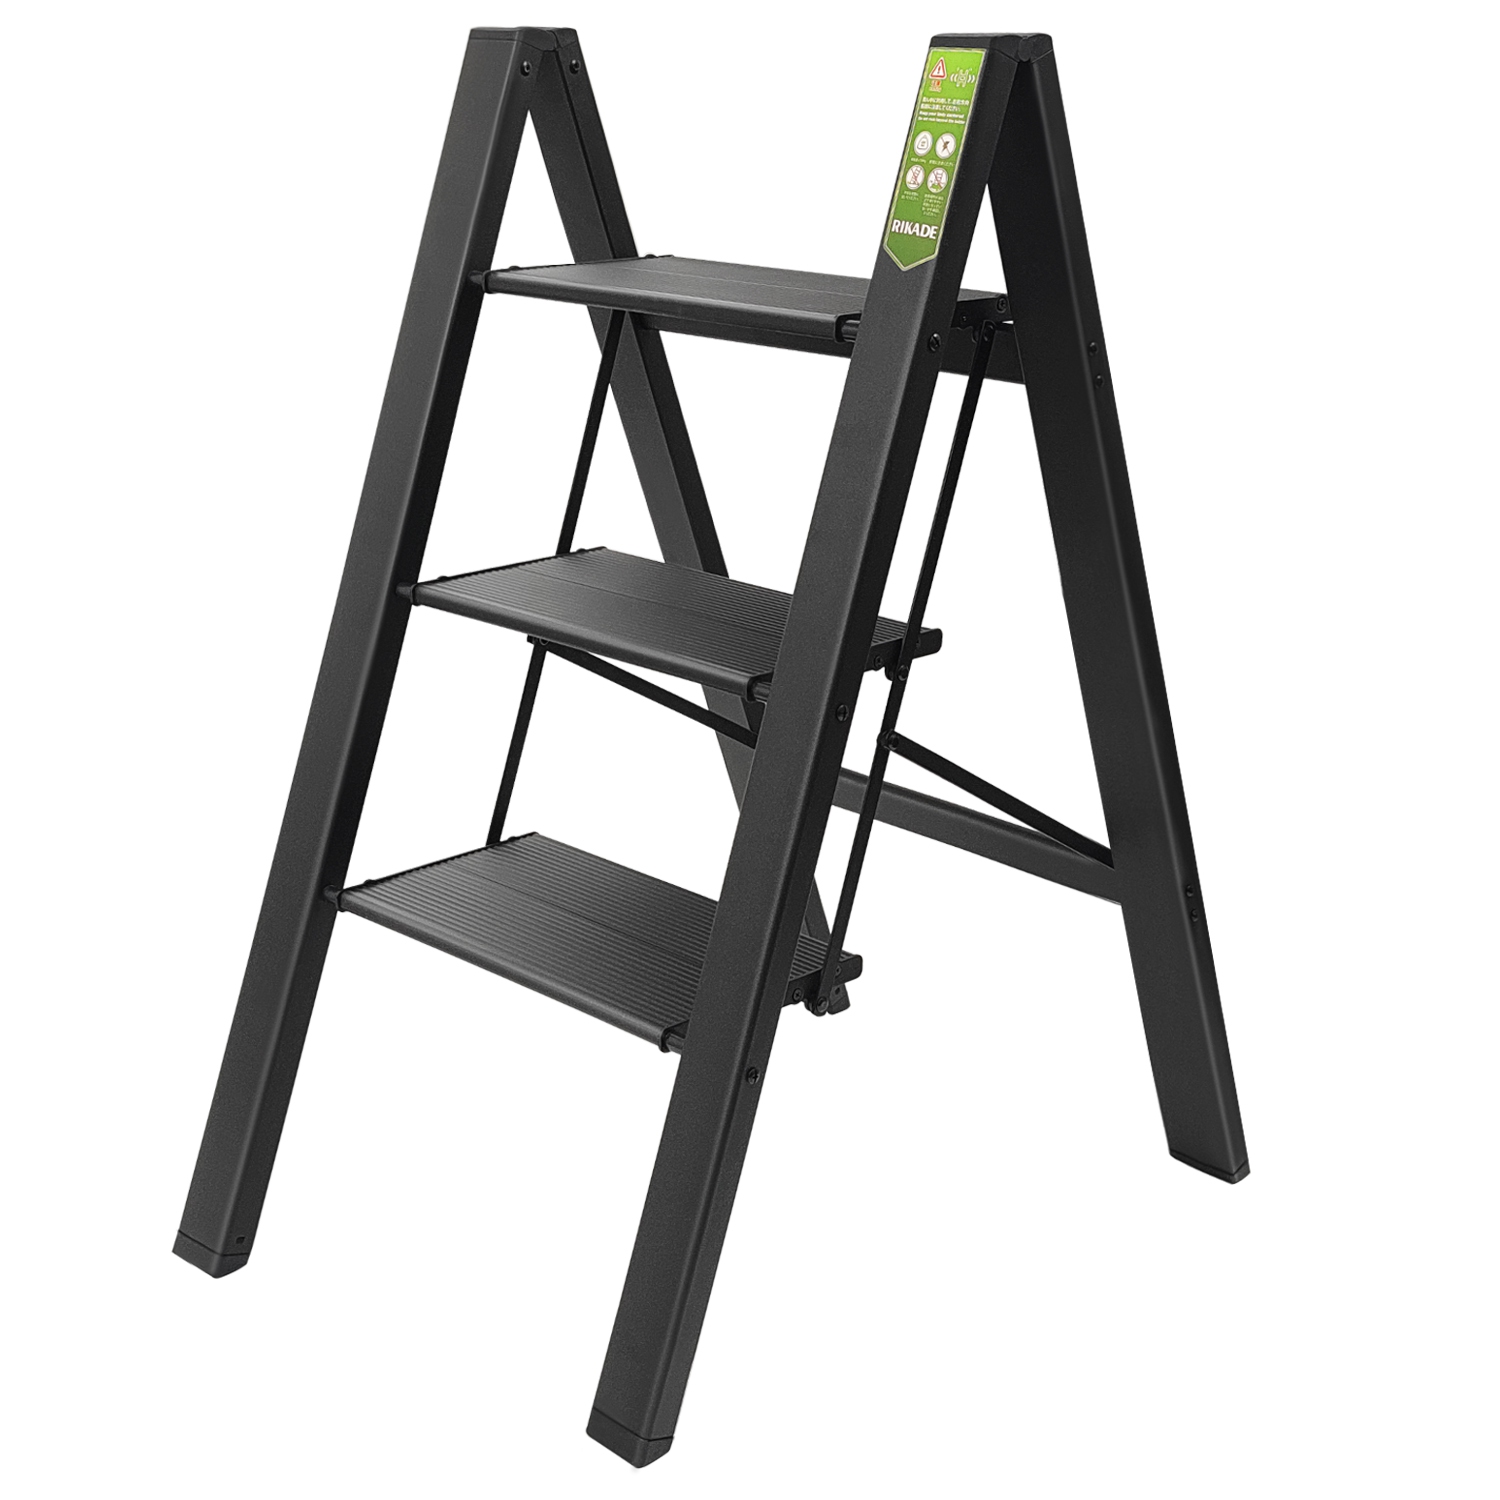 3 Step Ladder, CoolHut Folding Step Stool with Wide Anti-Slip Pedal, Aluminum Portable Lightweight Ladder for Home and Office Use, Kitchen Step Stool 330lb Capacity